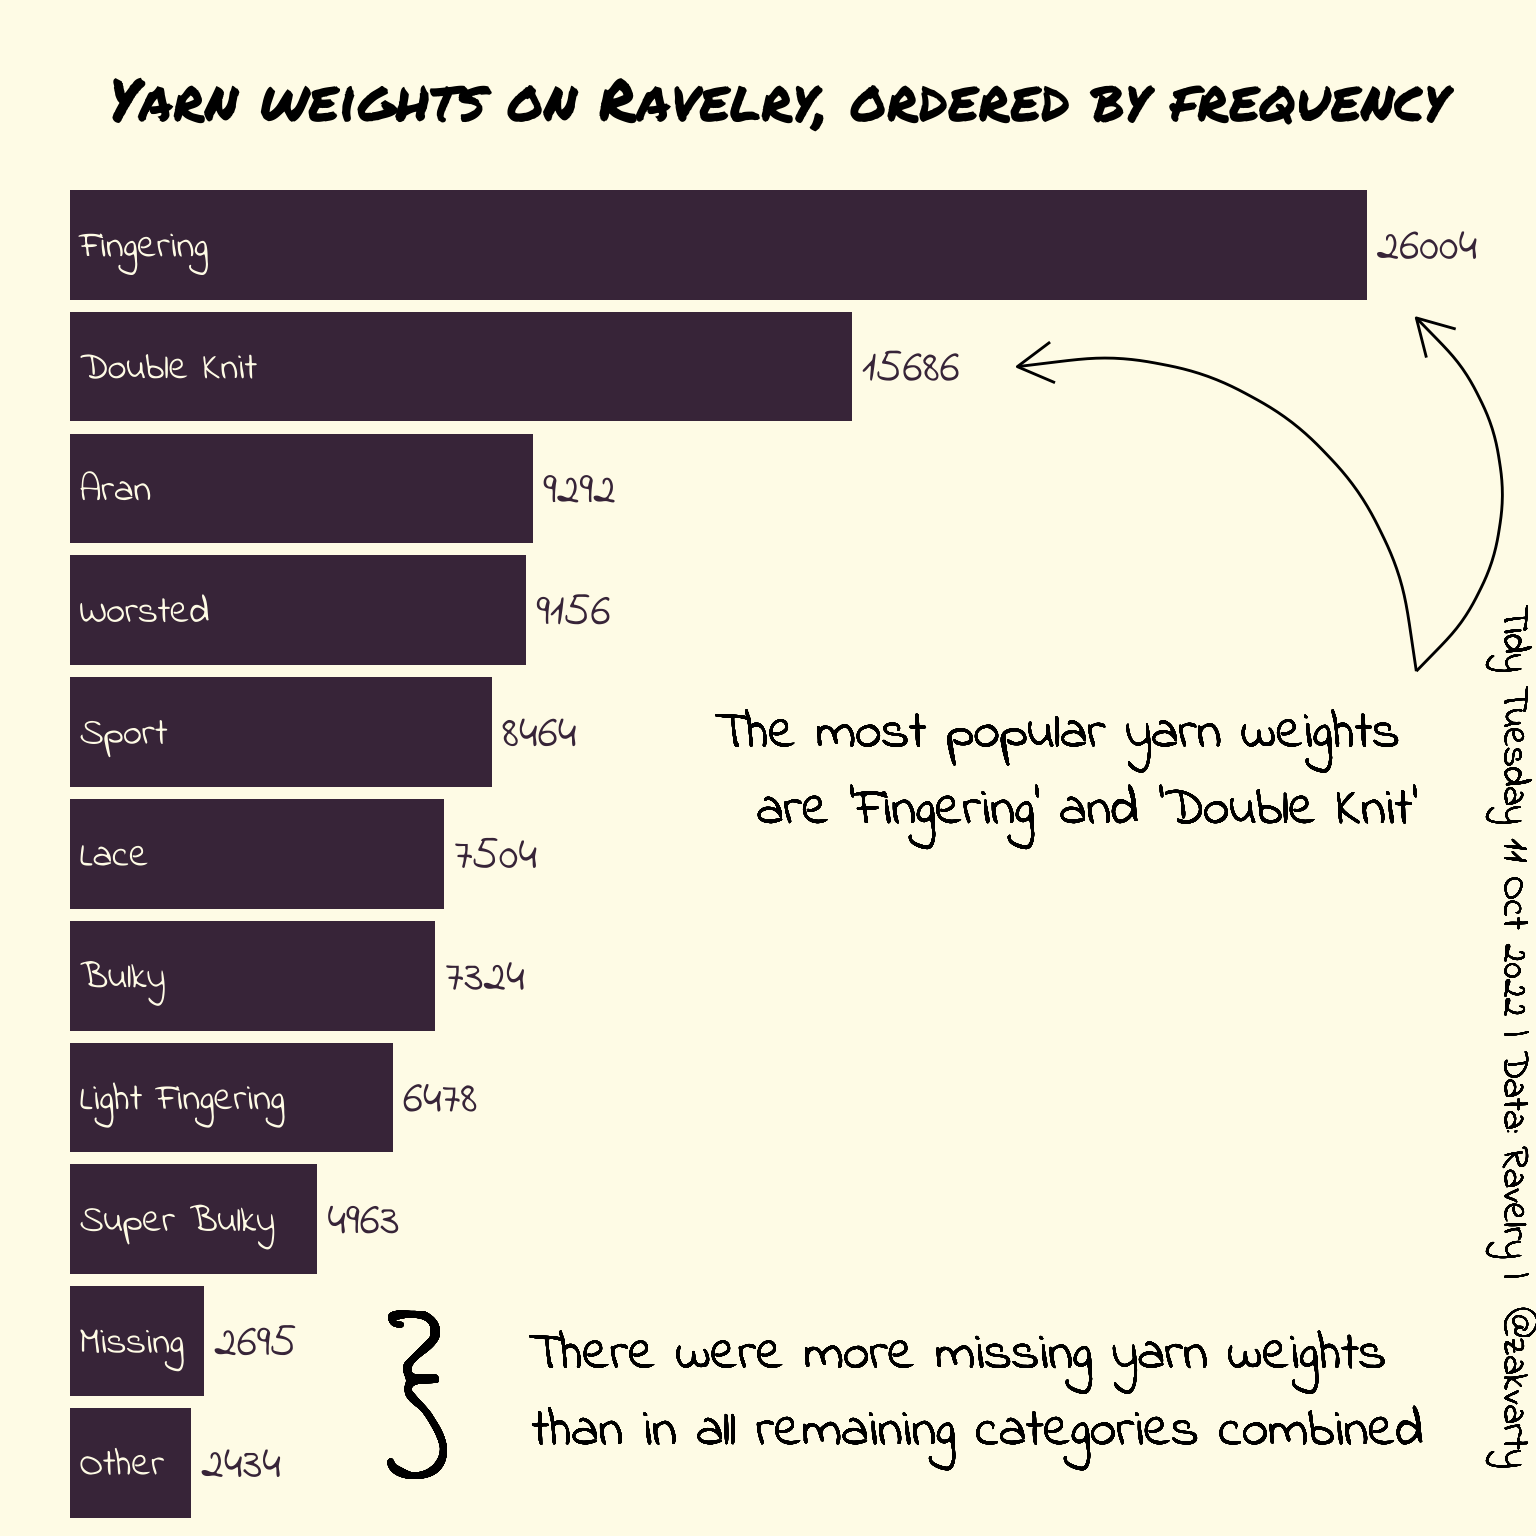 Stacked bar chart of yarn weights on Ravelry. Bars are descending order by their frequency, with yarn-type labels written within the bars and count values to the right of the bars. Annotations indicate that the most popular yarn weights are 'Fingering' and 'Double Knit', and that there were more missing yarn weights than in all remaining categories combined.